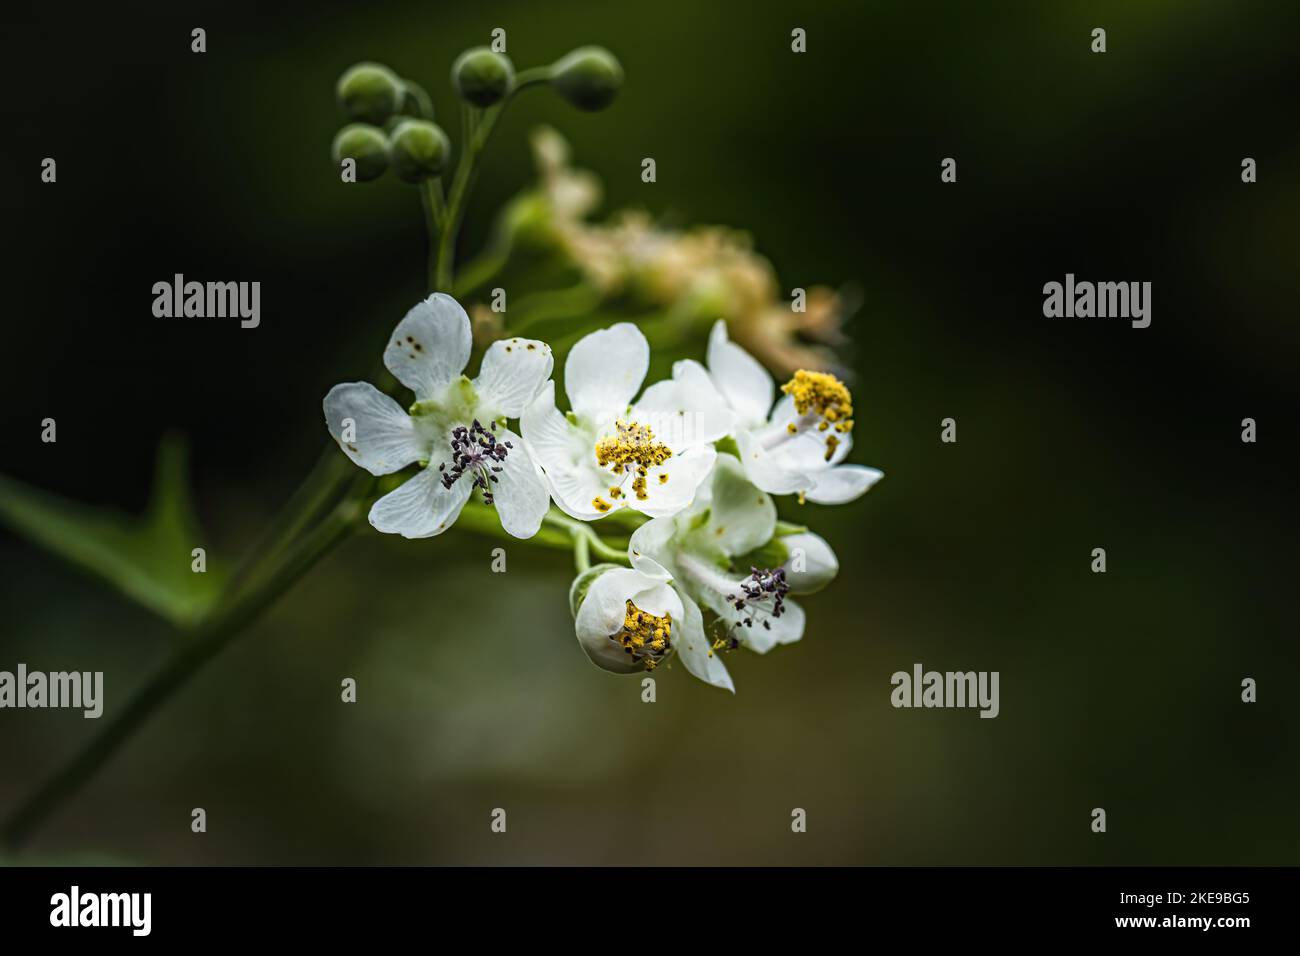 A closeup of blooming Cardiospermum grandiflorum flowers isolated in blurred background Stock Photo